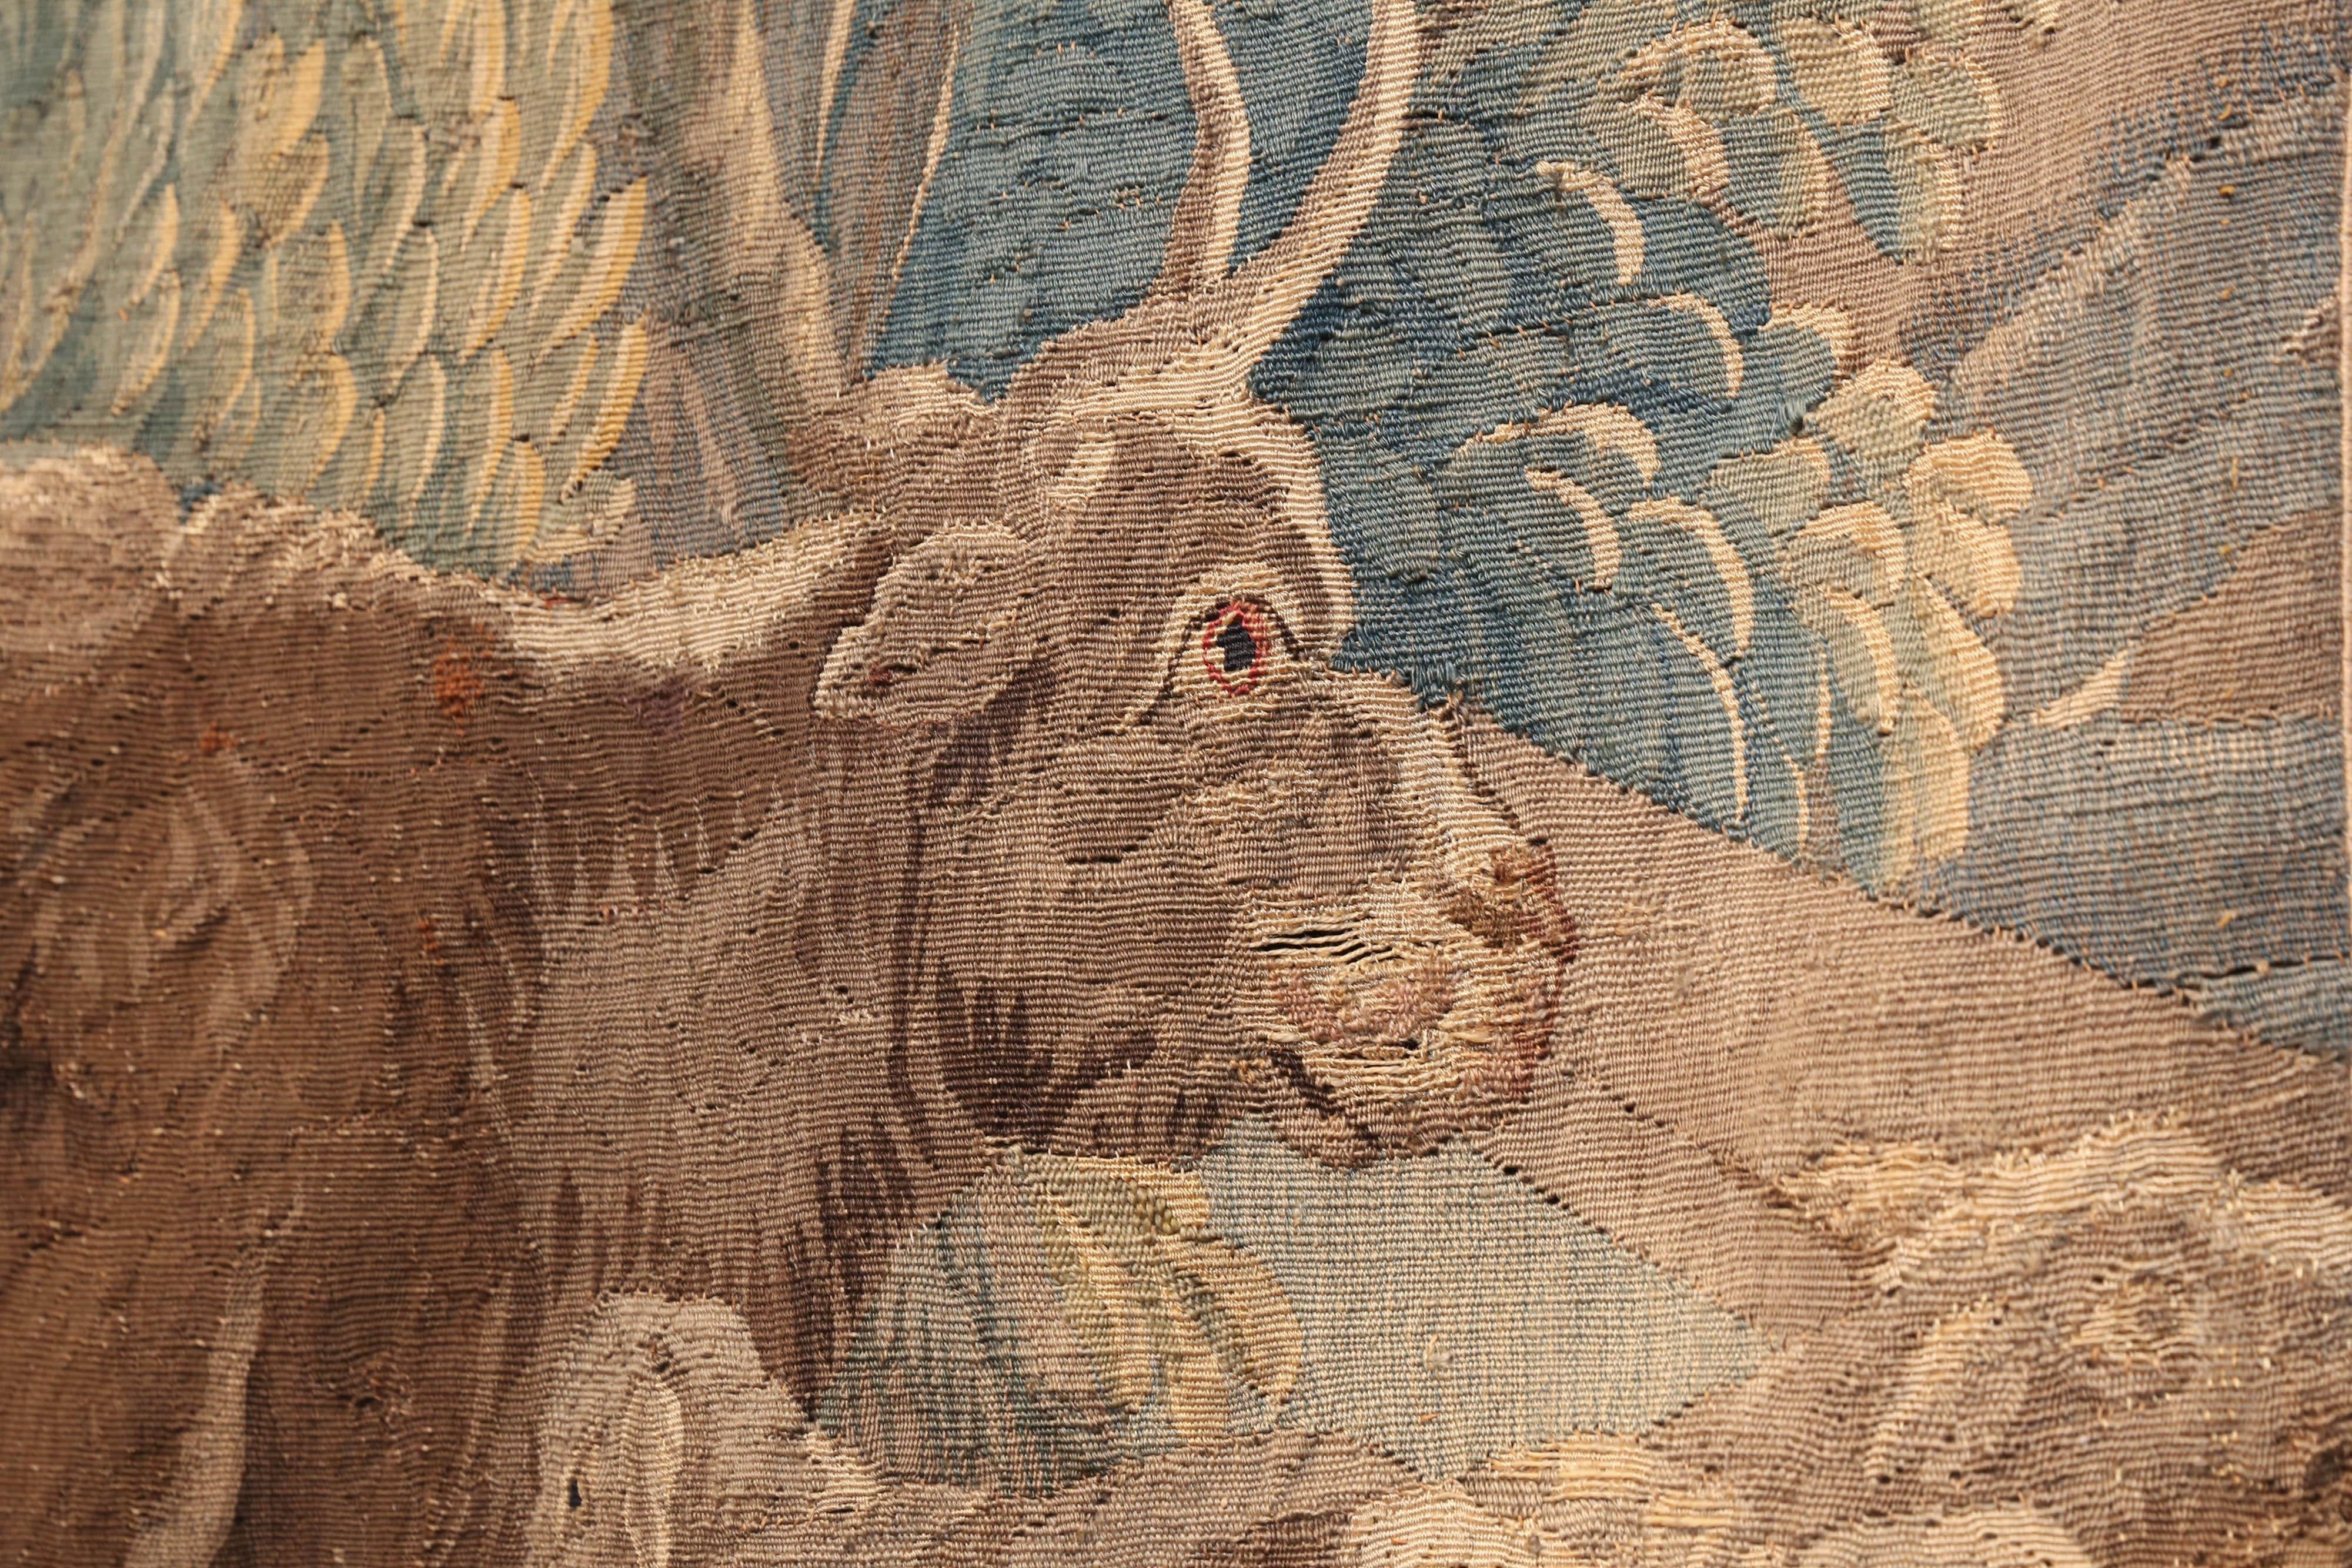 Flemish Tapestry 18th C Pastoral Landscape with Sheep and Cow with Shepherdess In Good Condition For Sale In Houston, TX